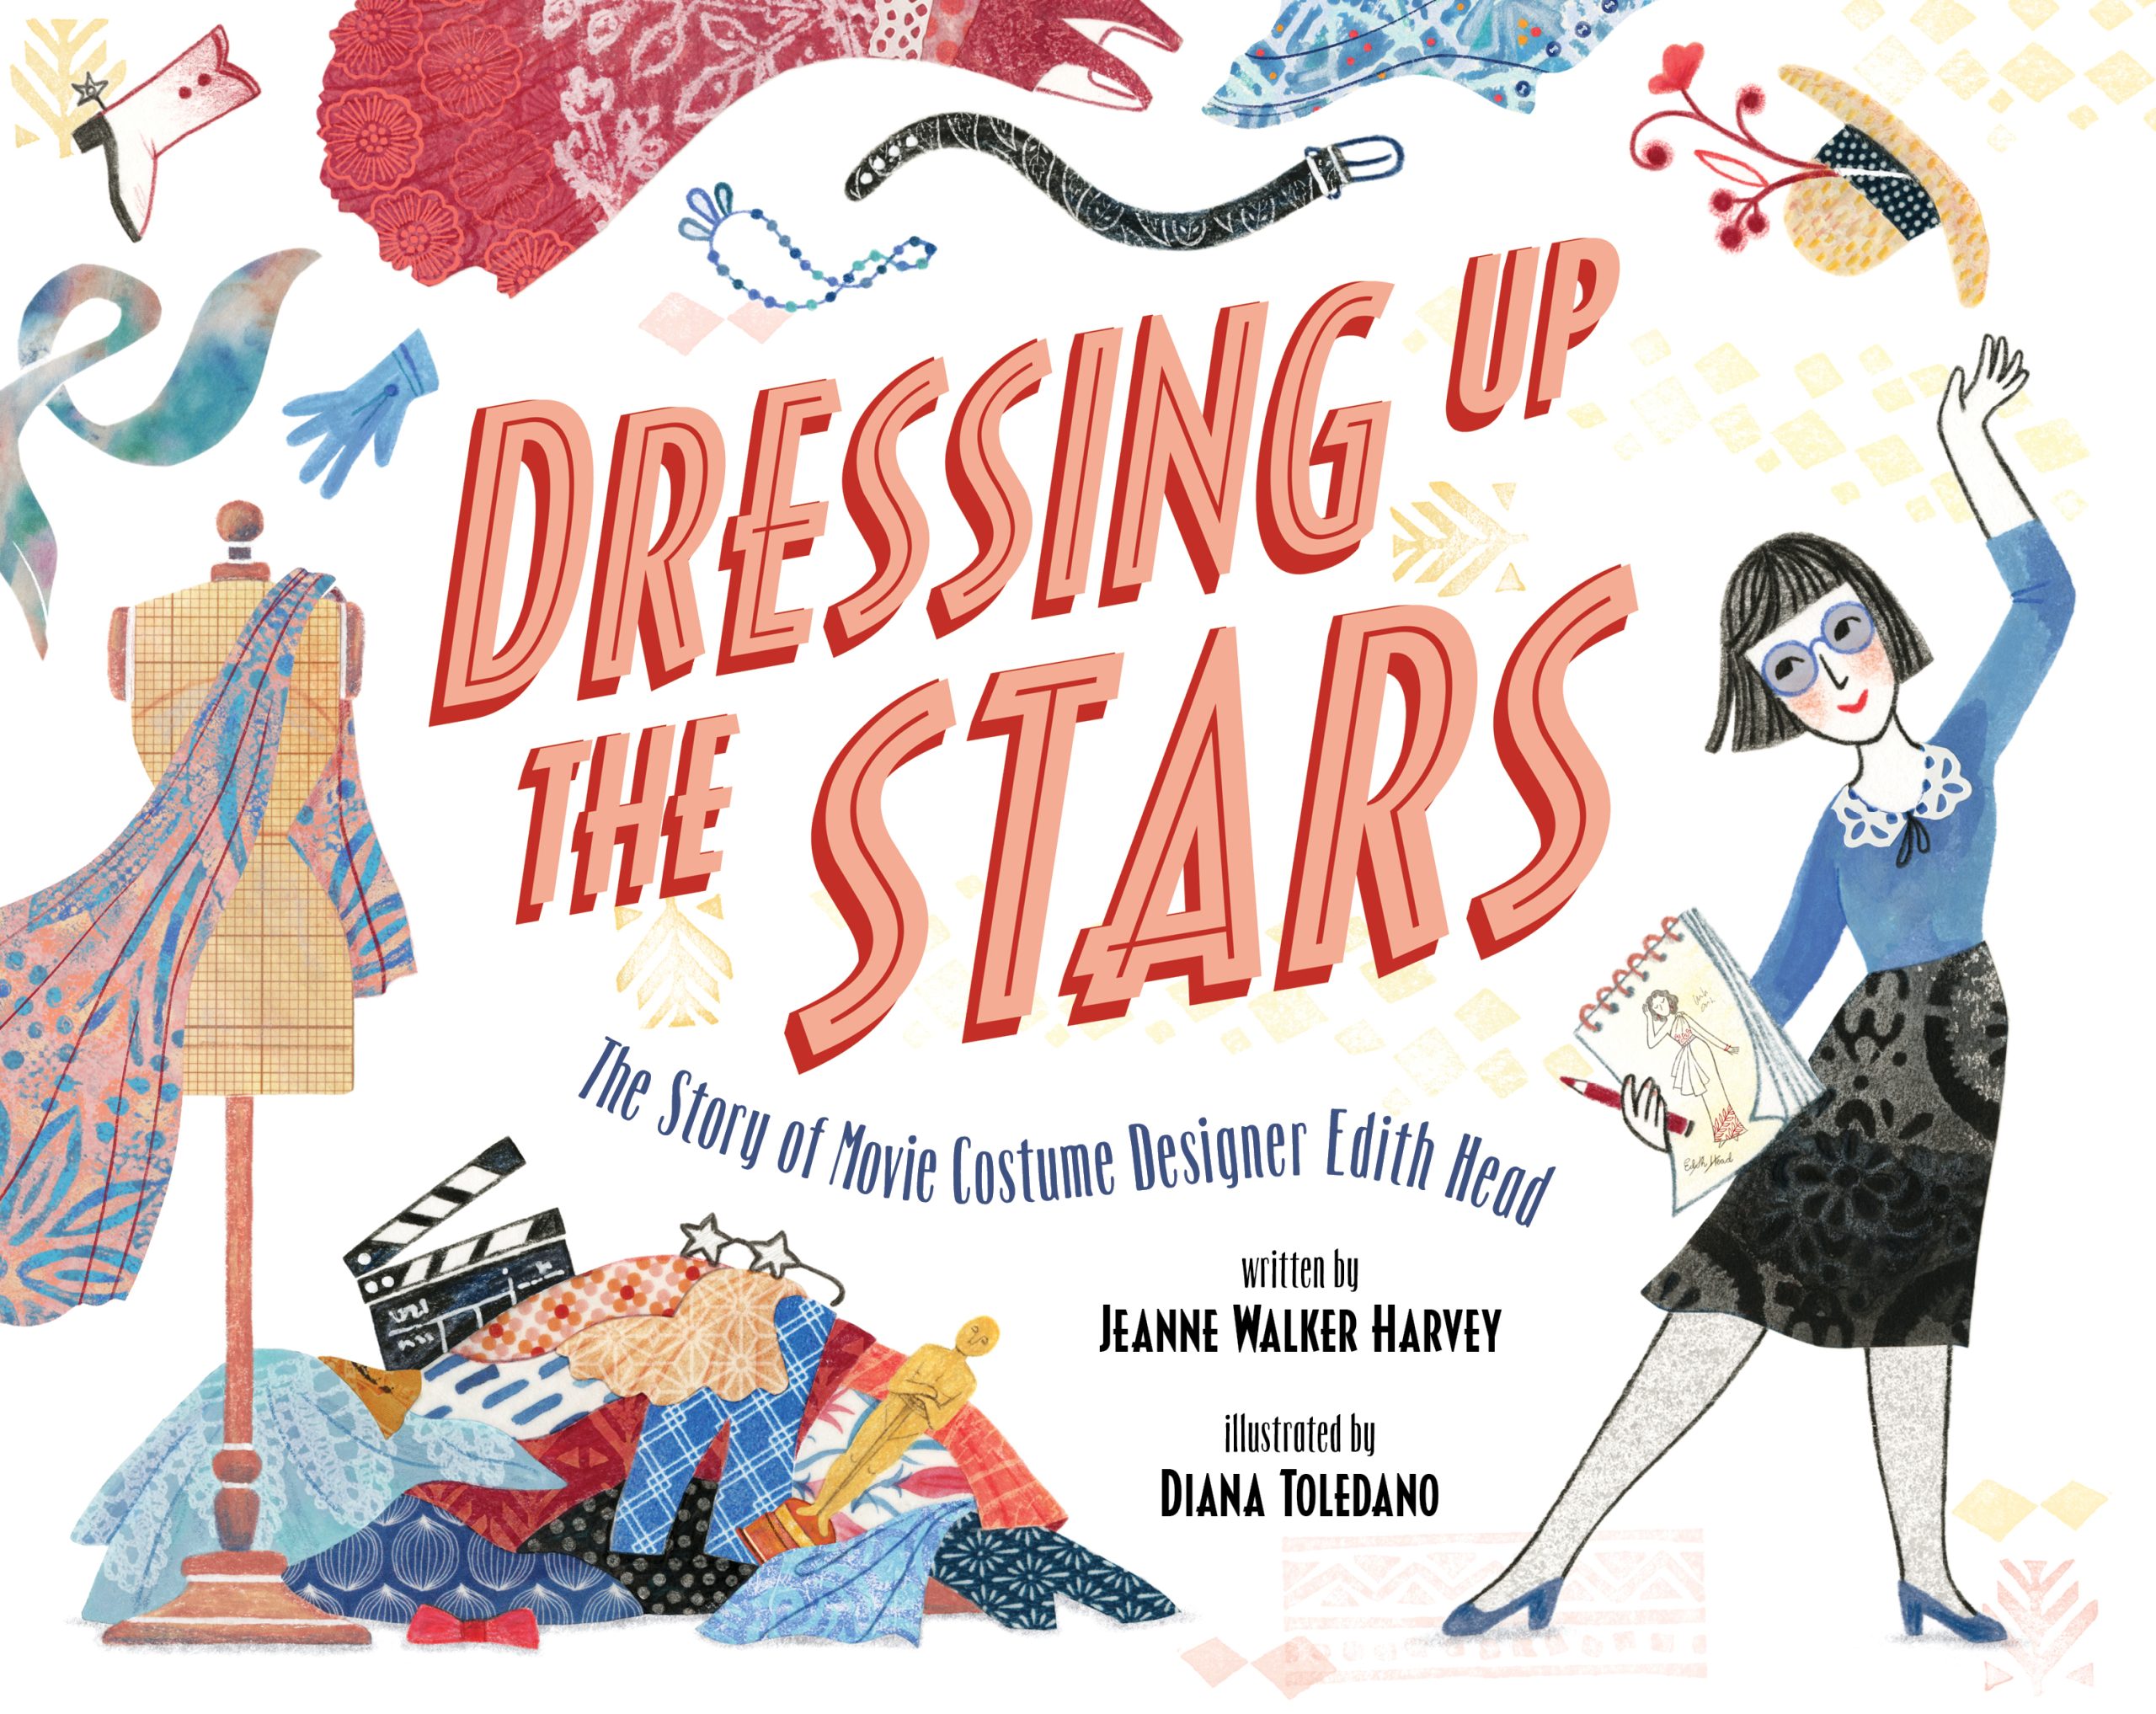 Author Chat With Jeanne Walker Harvey (Dressing up the Stars), Plus Giveaway! ~US ONLY (No P.O Boxes)